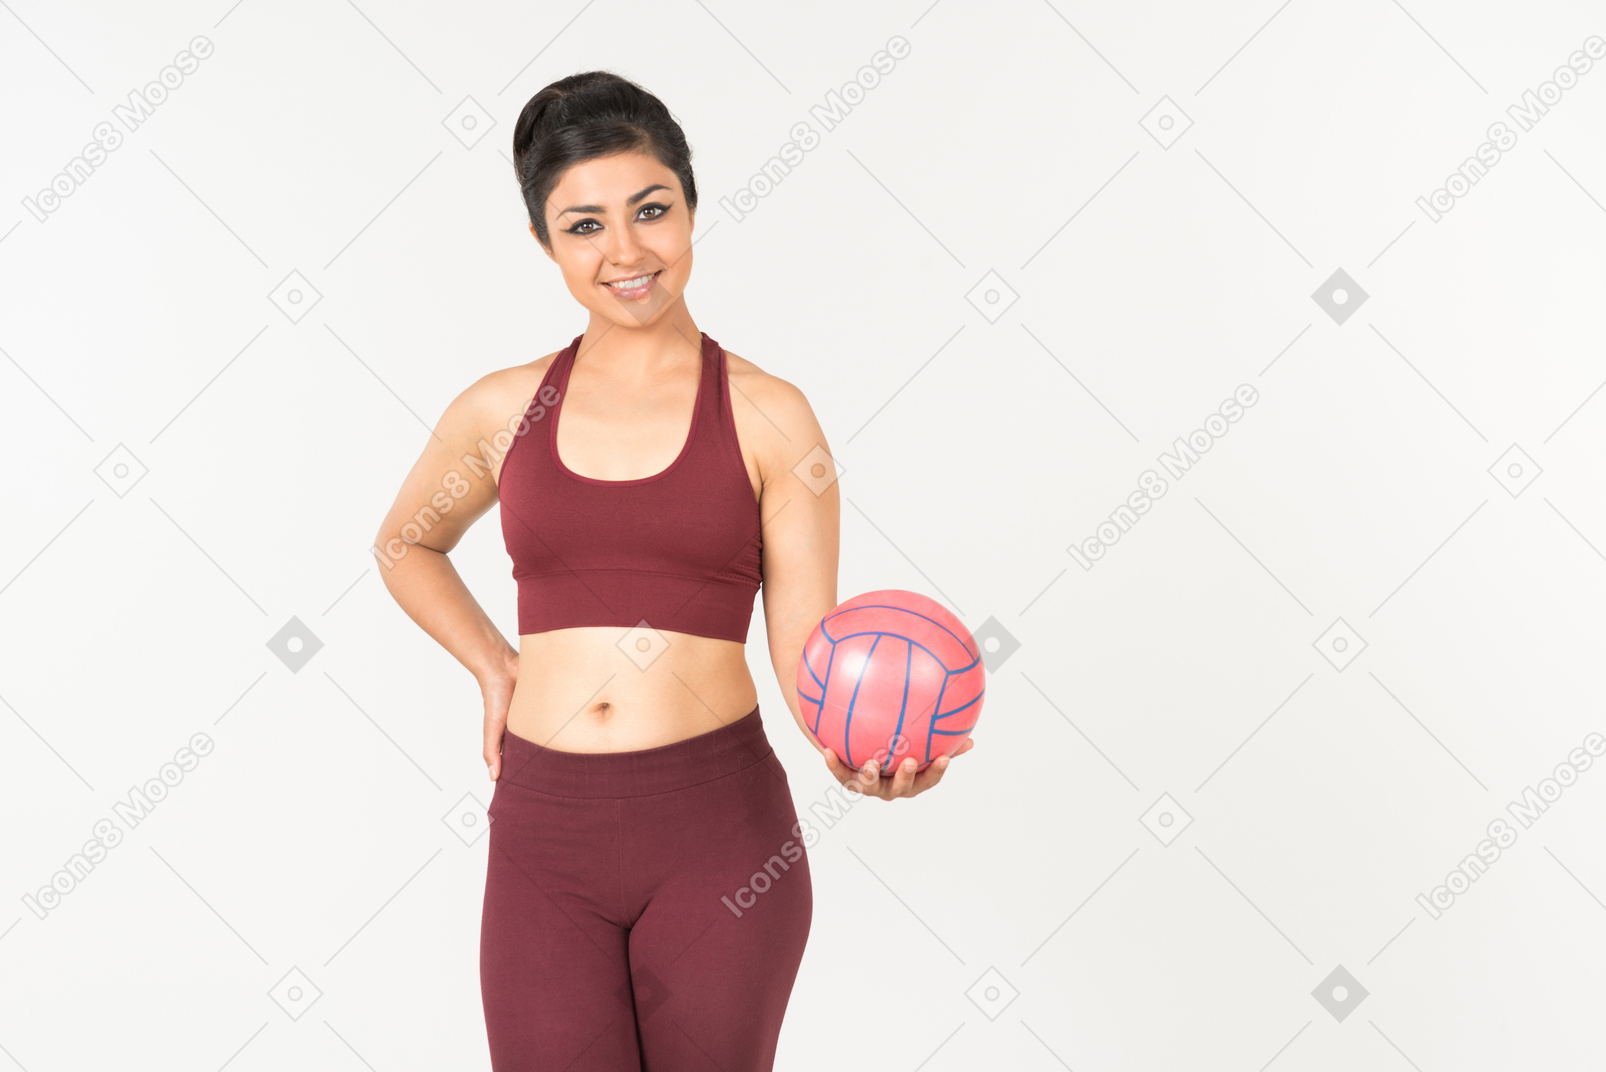 Young indian woman in sporstwear holding pink ball